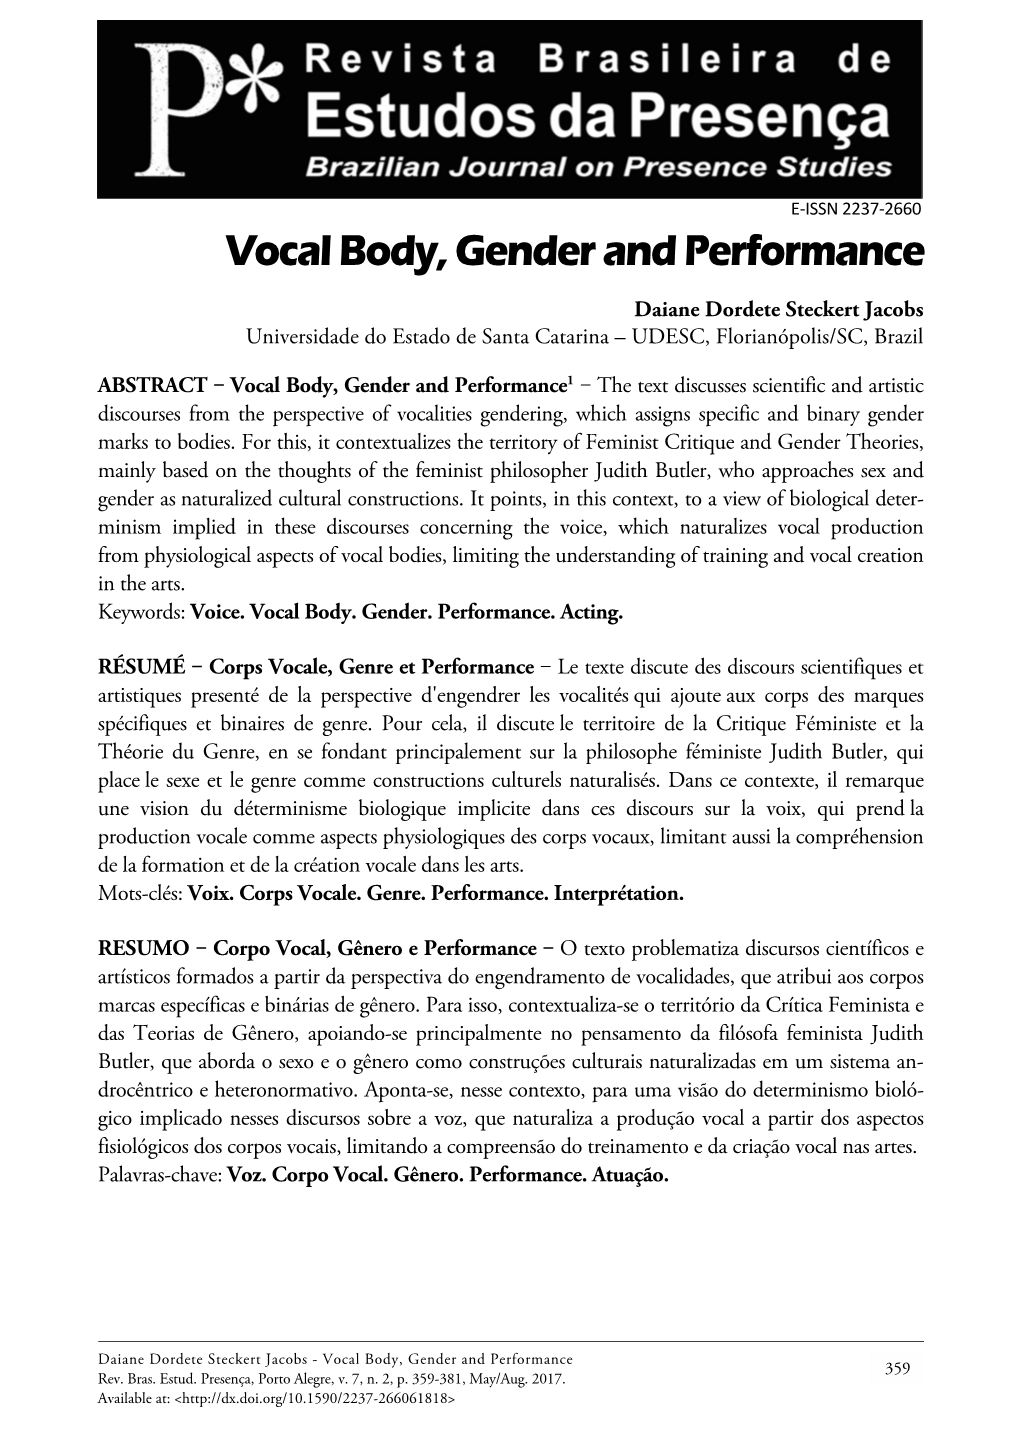 Vocal Body, Gender and Performance